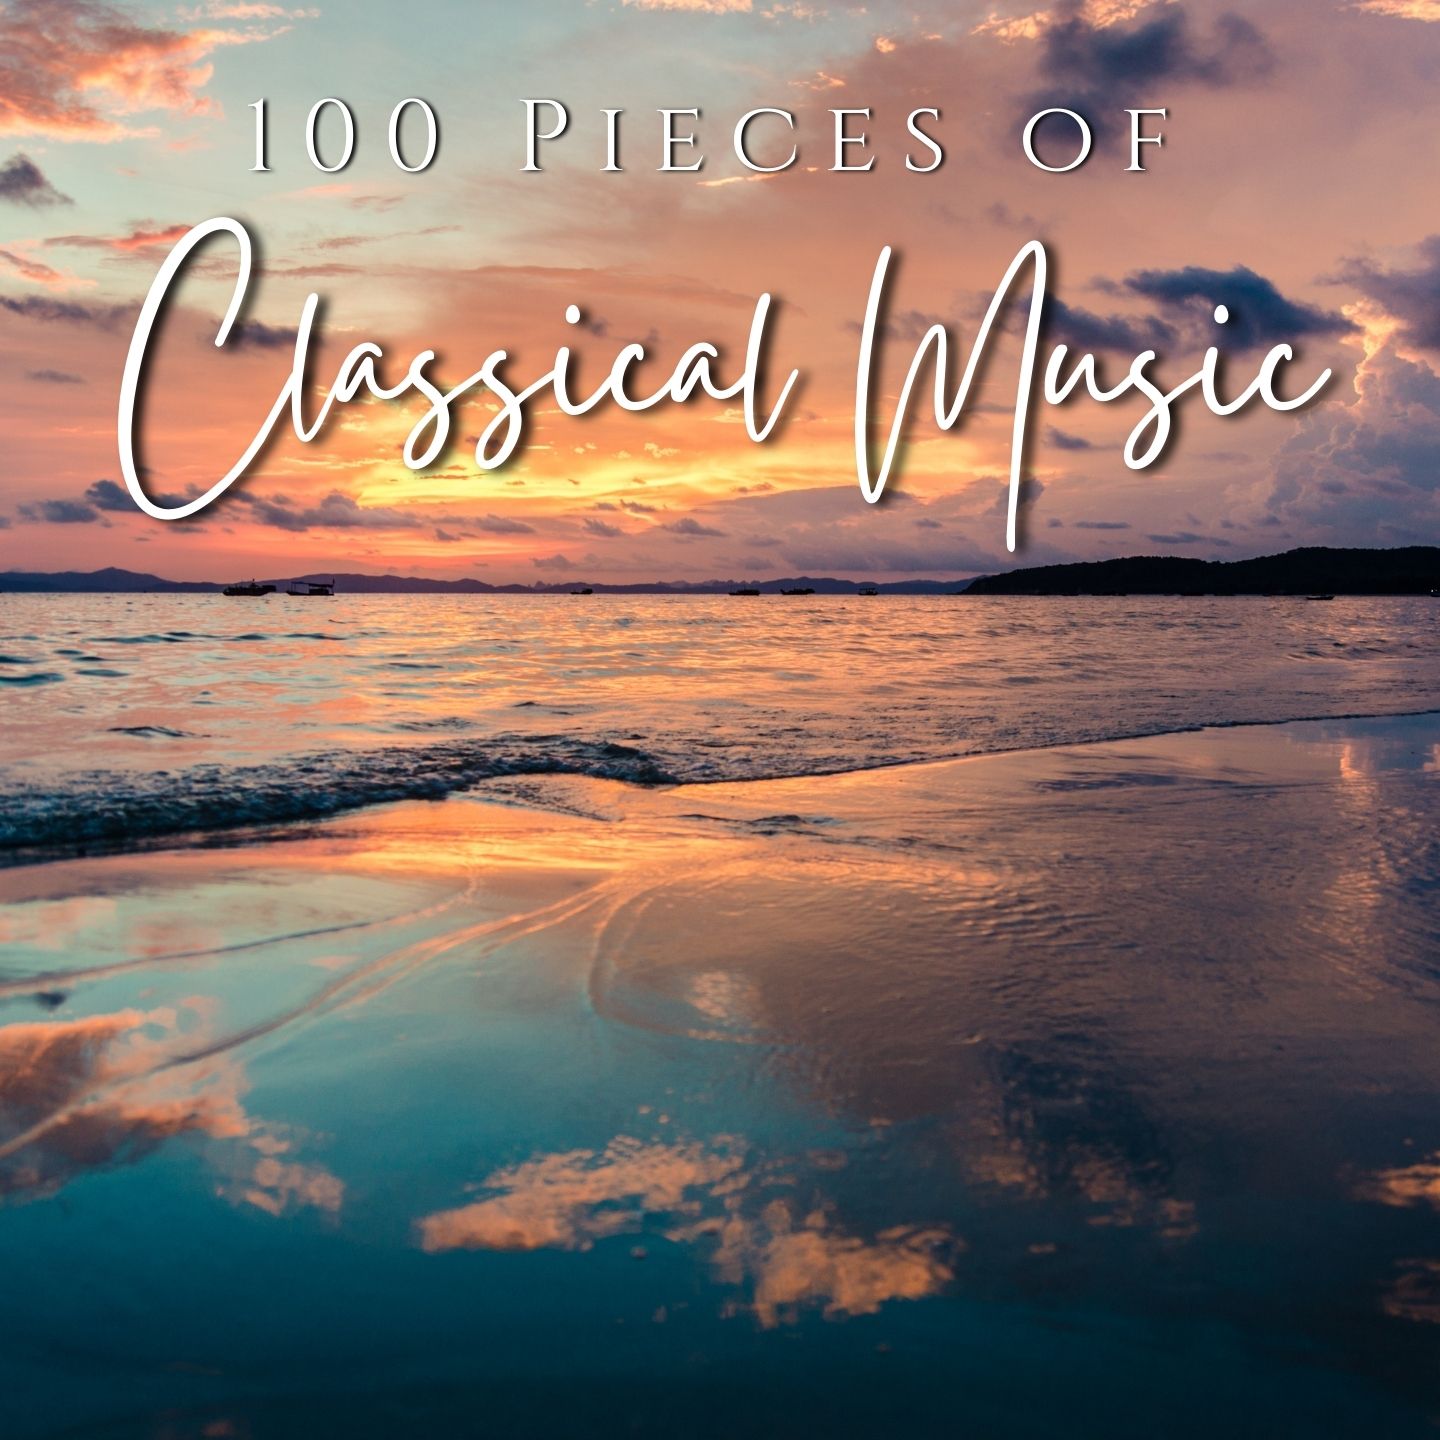 100 Pieces of Classical Music